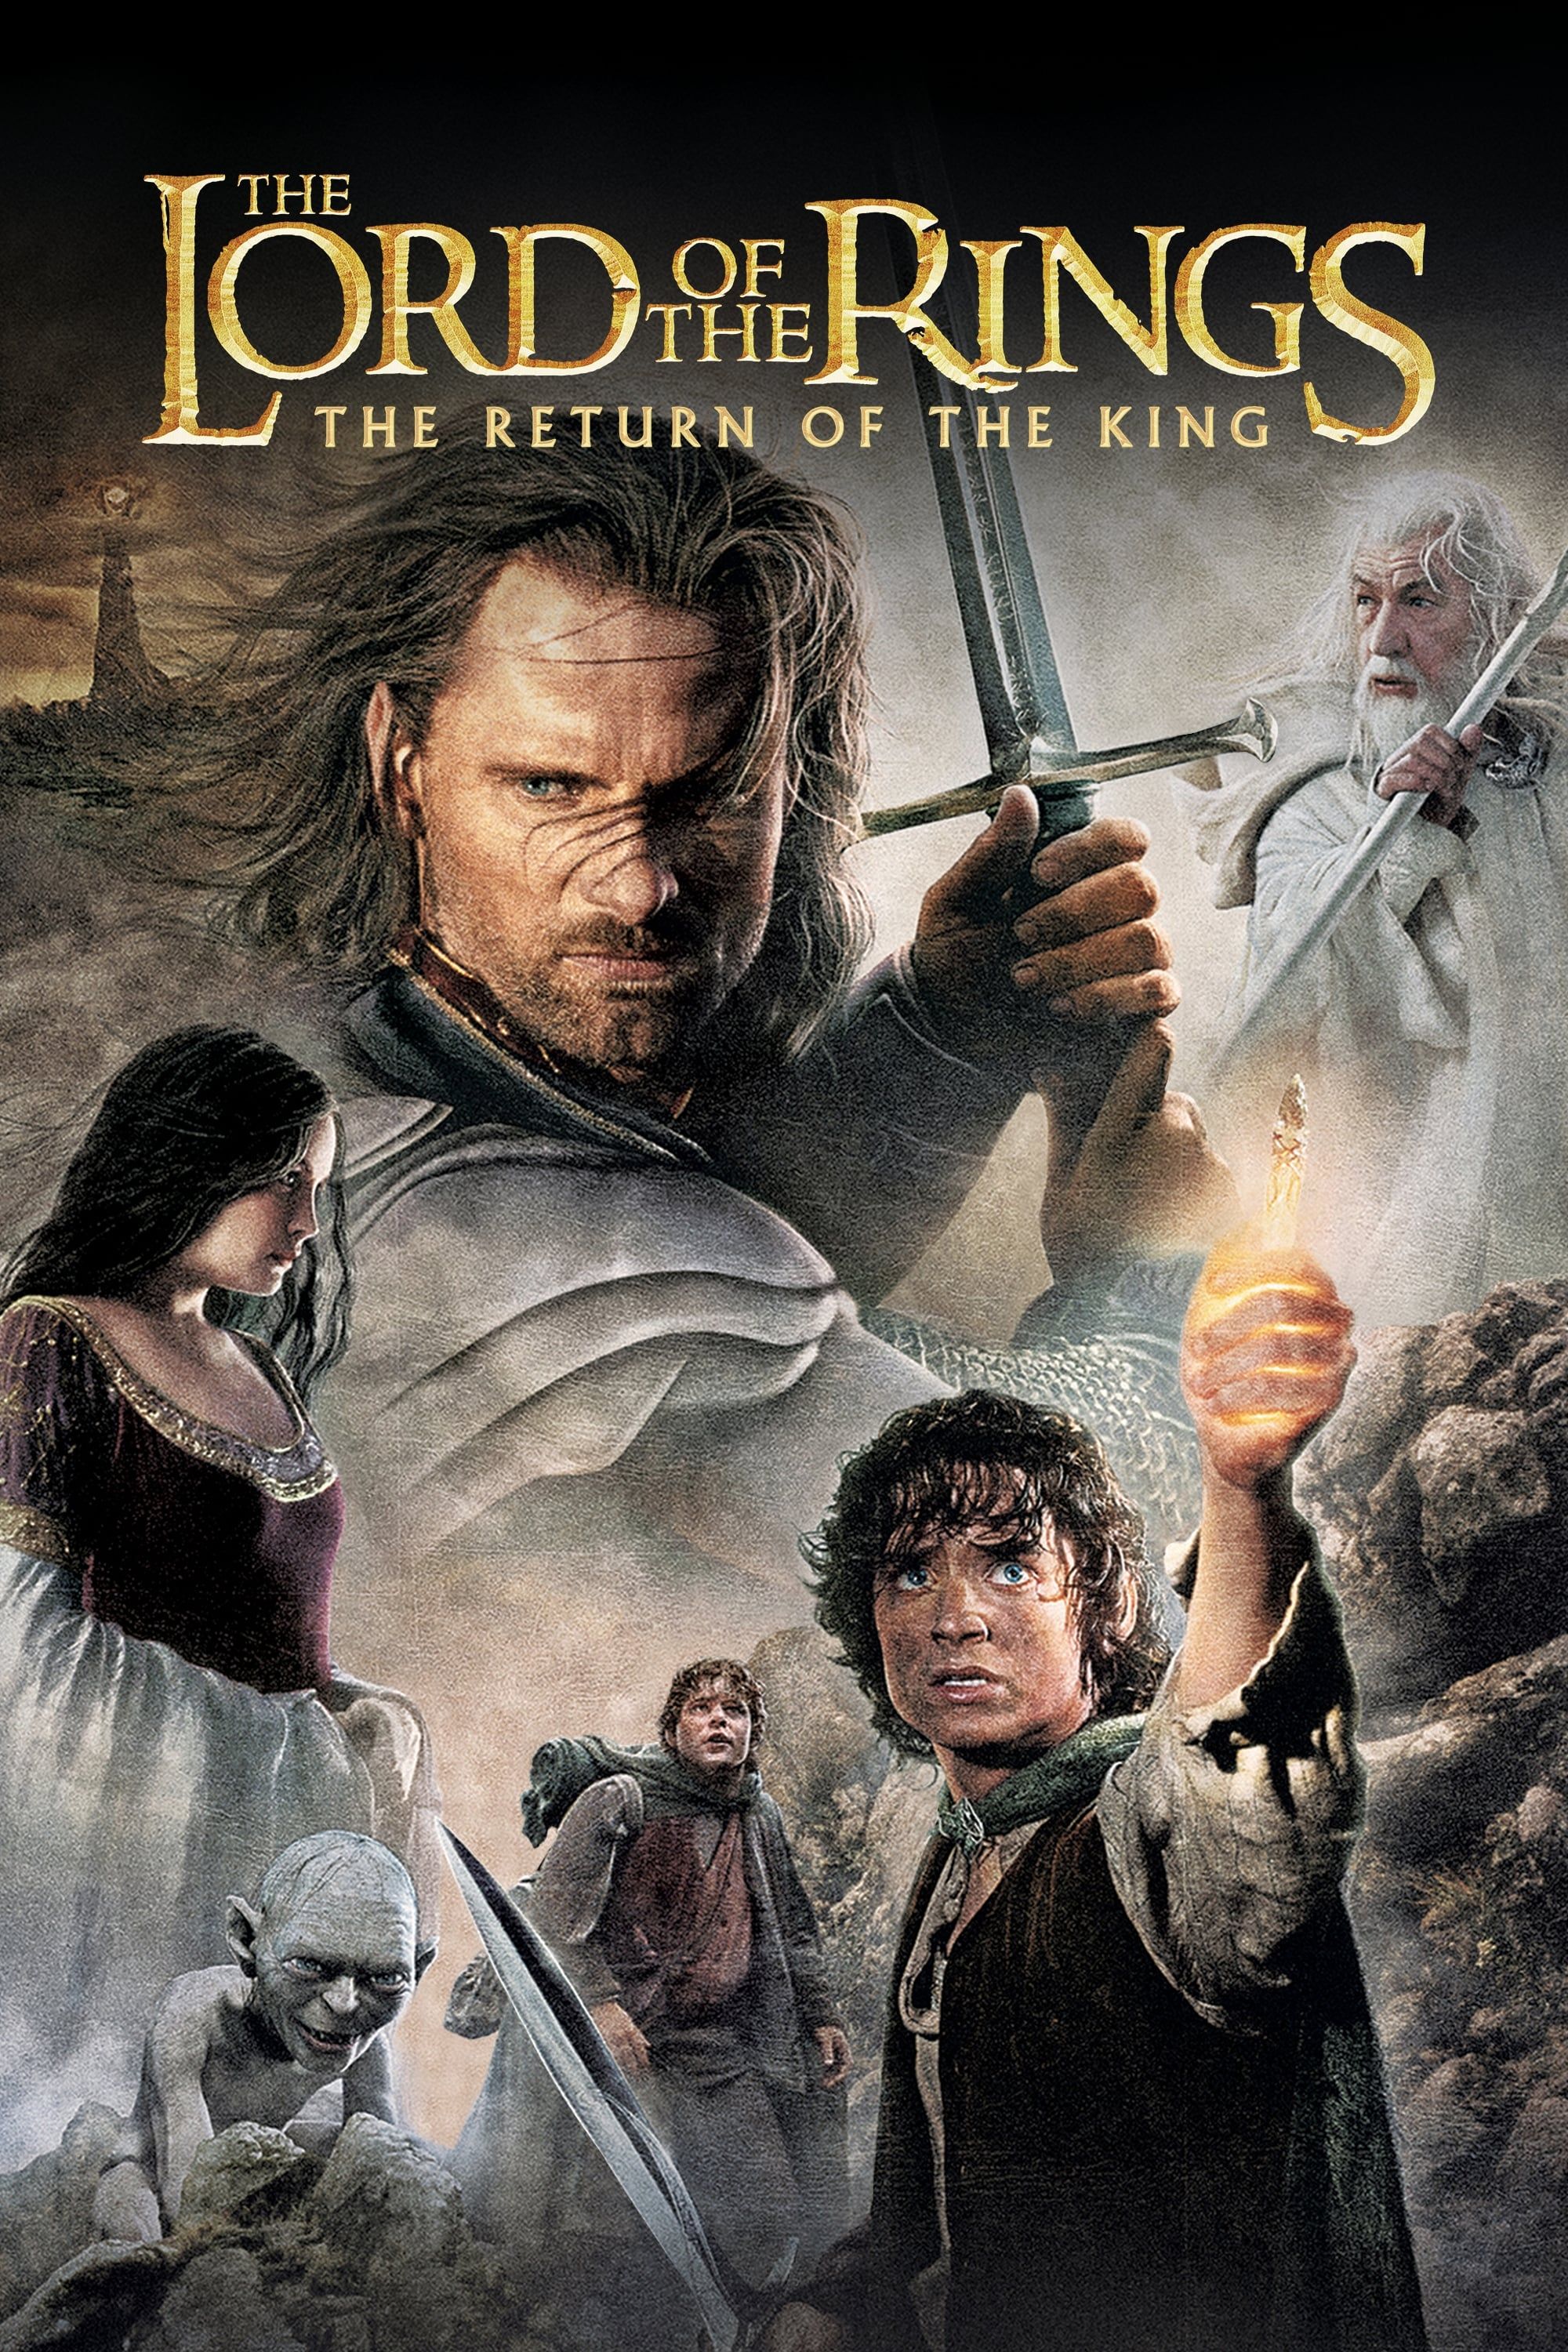 The Lord of the Rings The Return of the King (2003) Hindi Dubbed BluRay download full movie